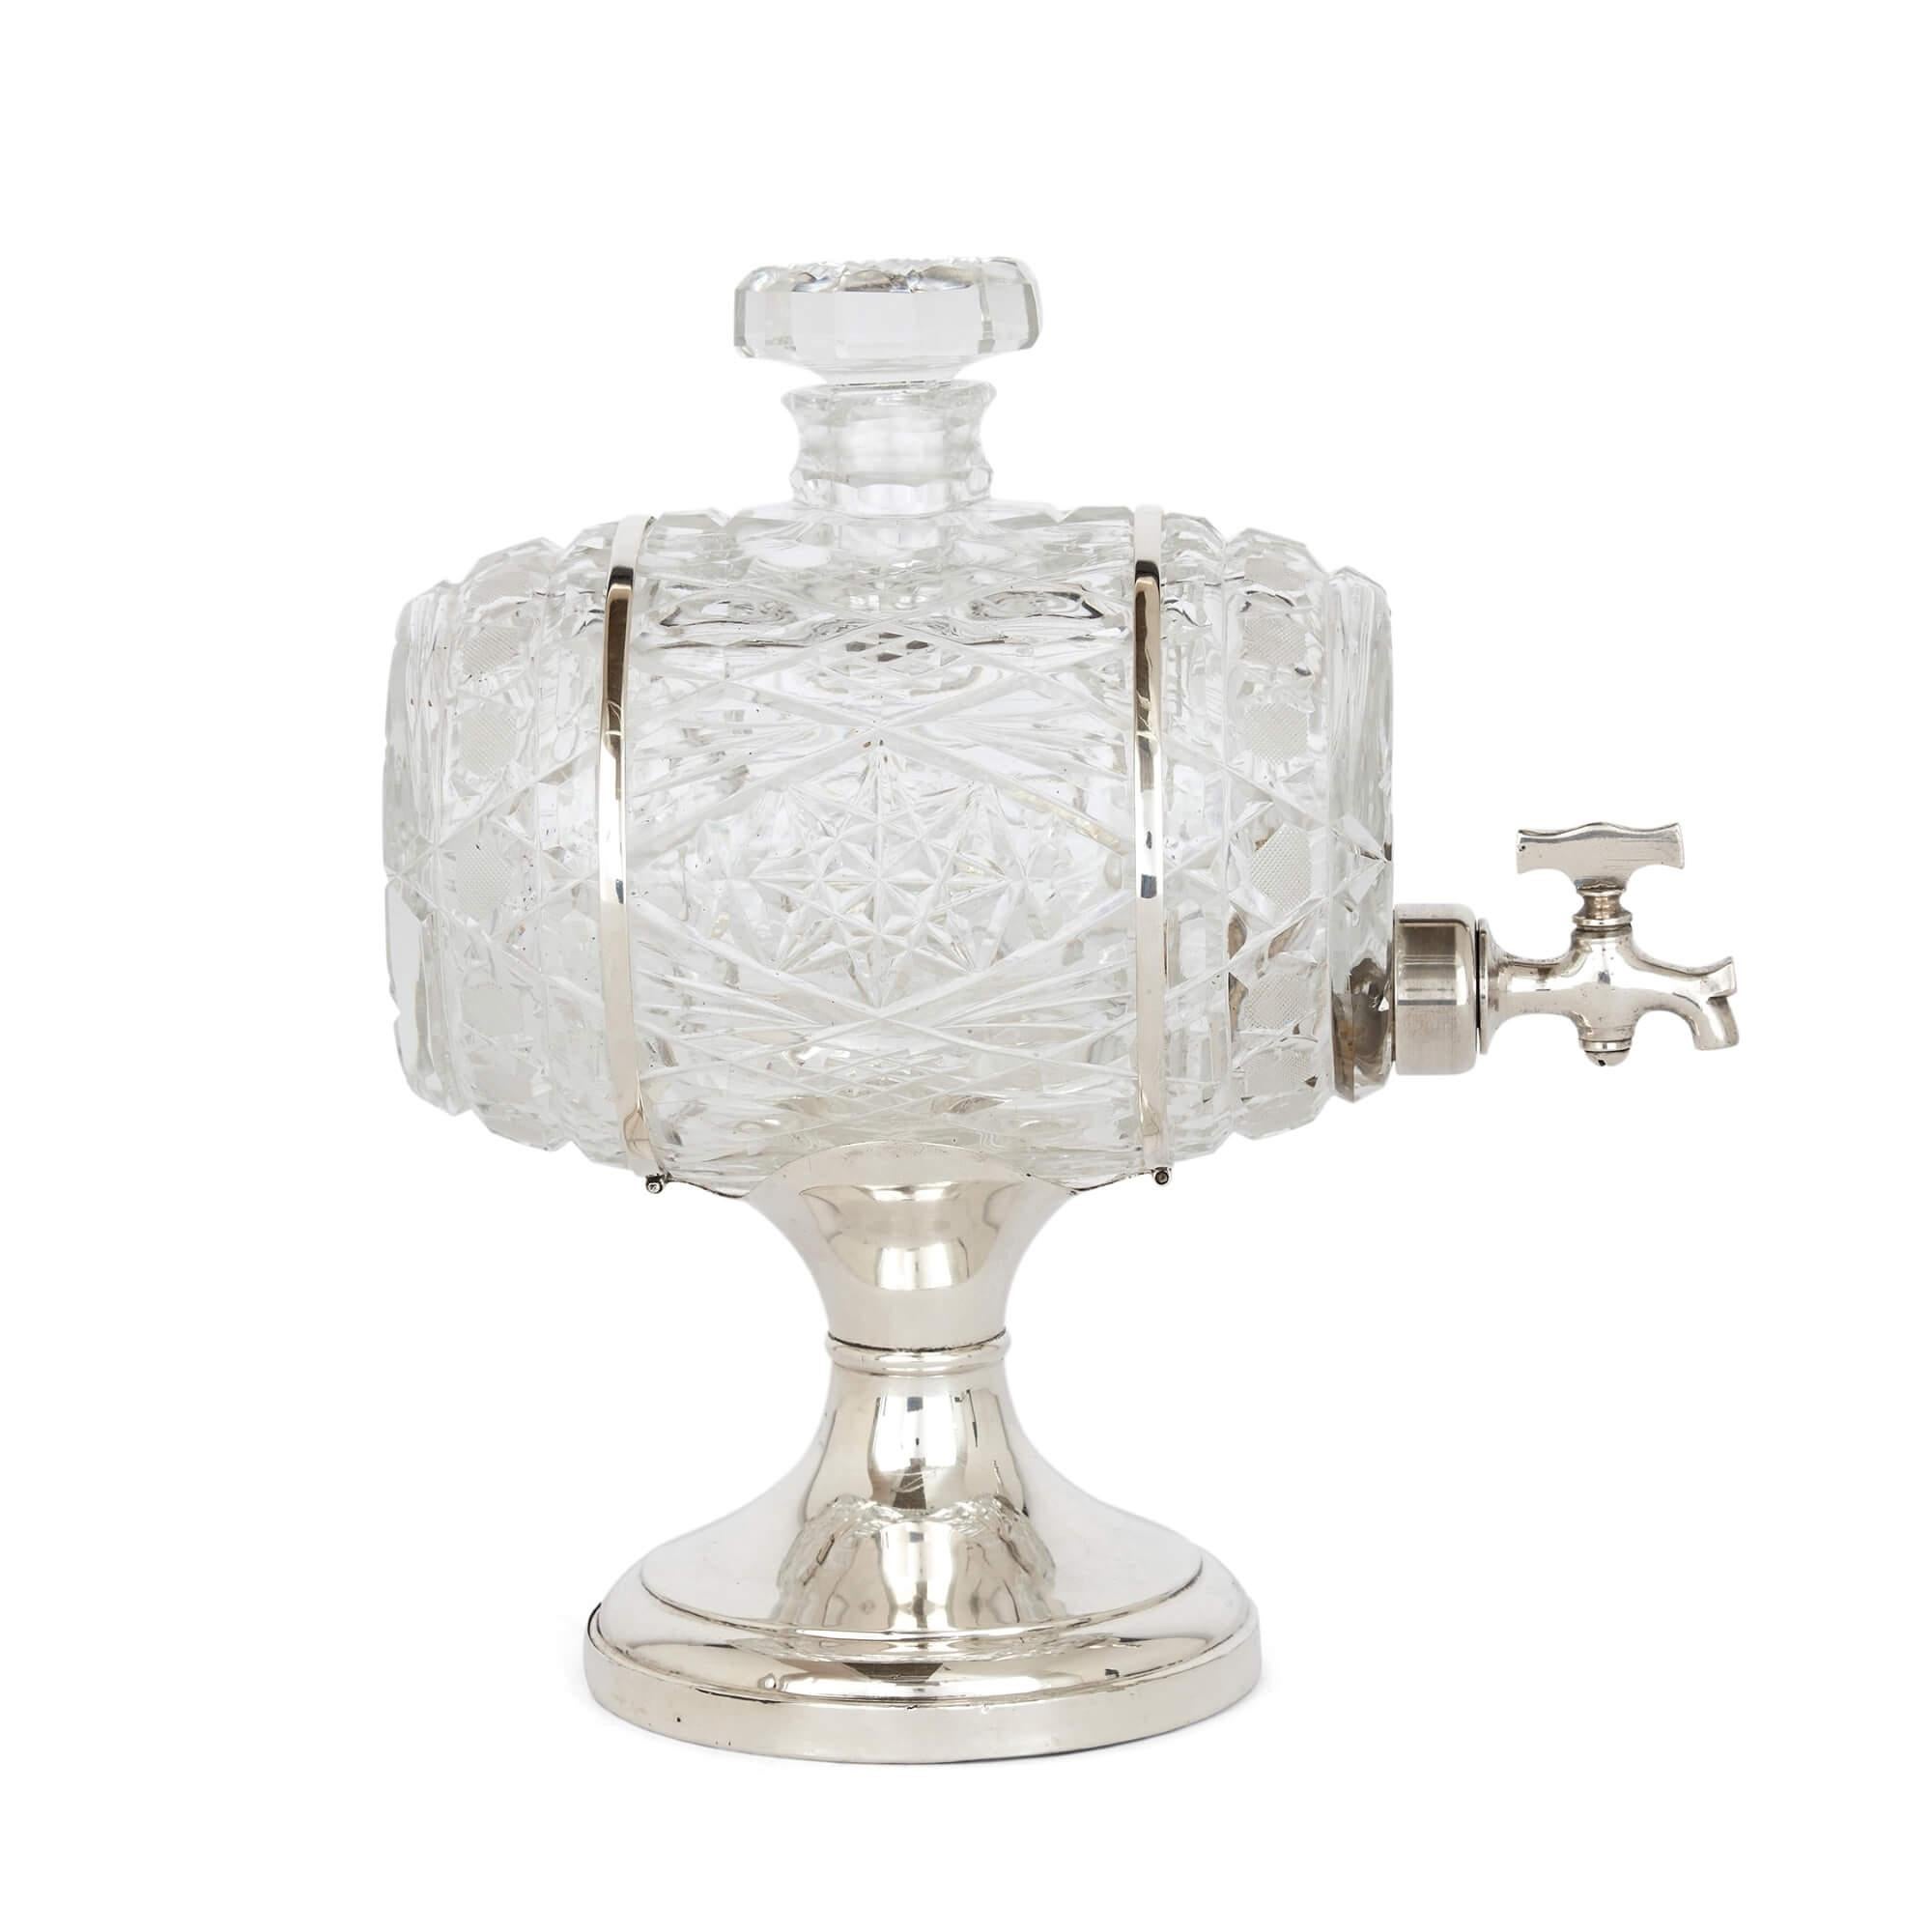 English crystal and silver barrel decanter
English, 1929
Measures: Height 26cm, width 12cm, depth 24cm

This wonderful decanter is modelled as a barrel, replete with tap to empty its contents. The body of the barrel is crafted from cut crystal,